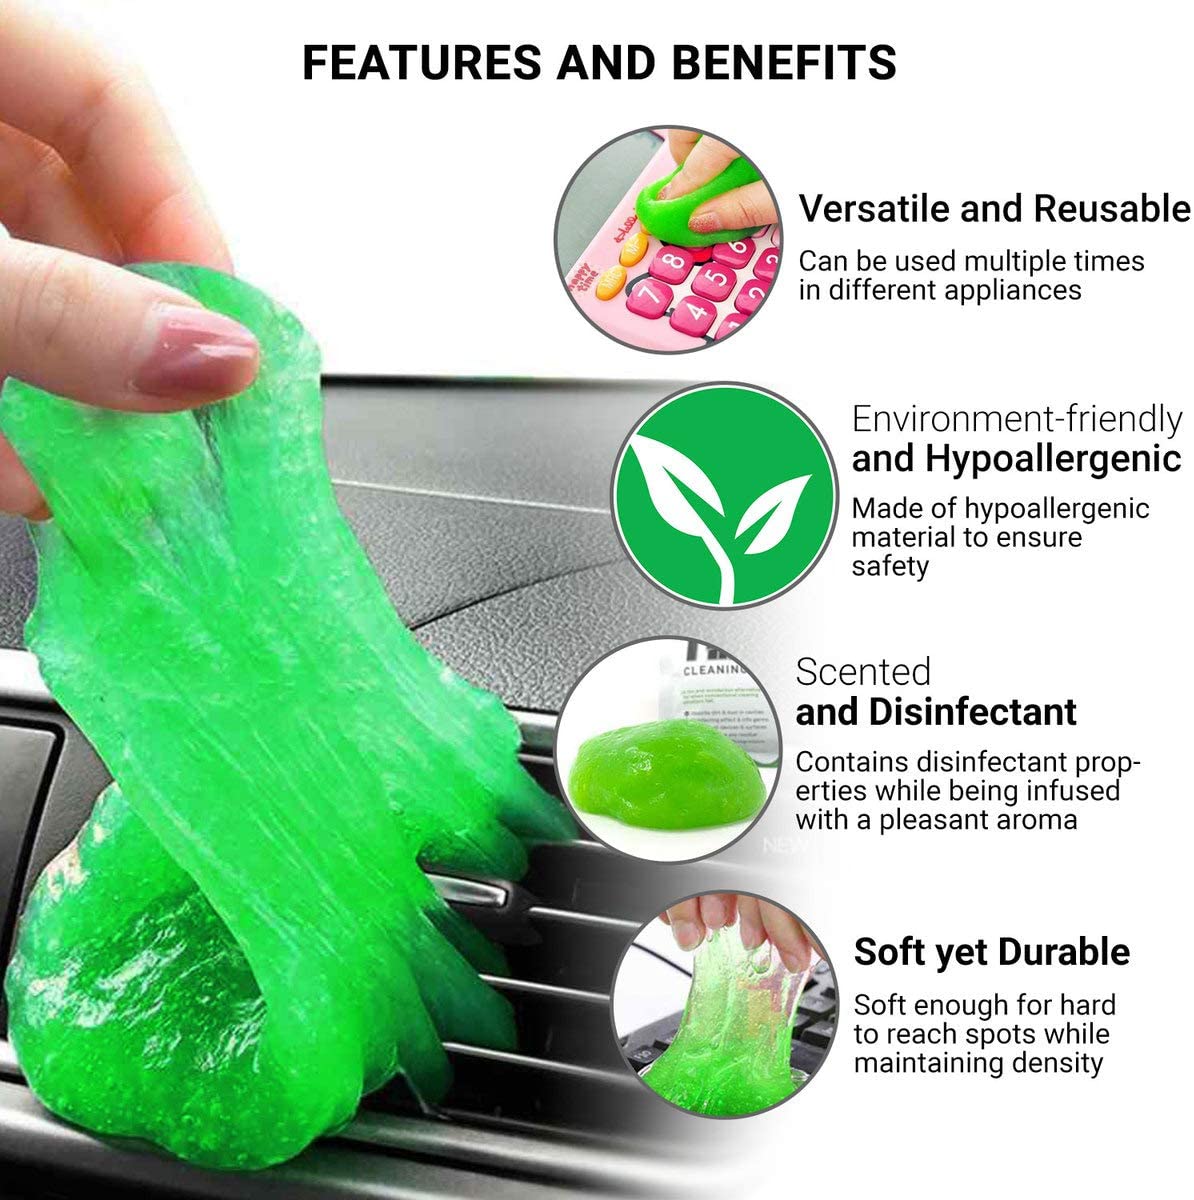 ULTRICS Keyboard Dust Cleaner, Magic Sticky Gel Putty Soft Flexible Cleaning Kit for PC Computer Laptop MacBook Remote Control Mobile Telephone Printer Car Air Vents Dashboard Type Writer and More